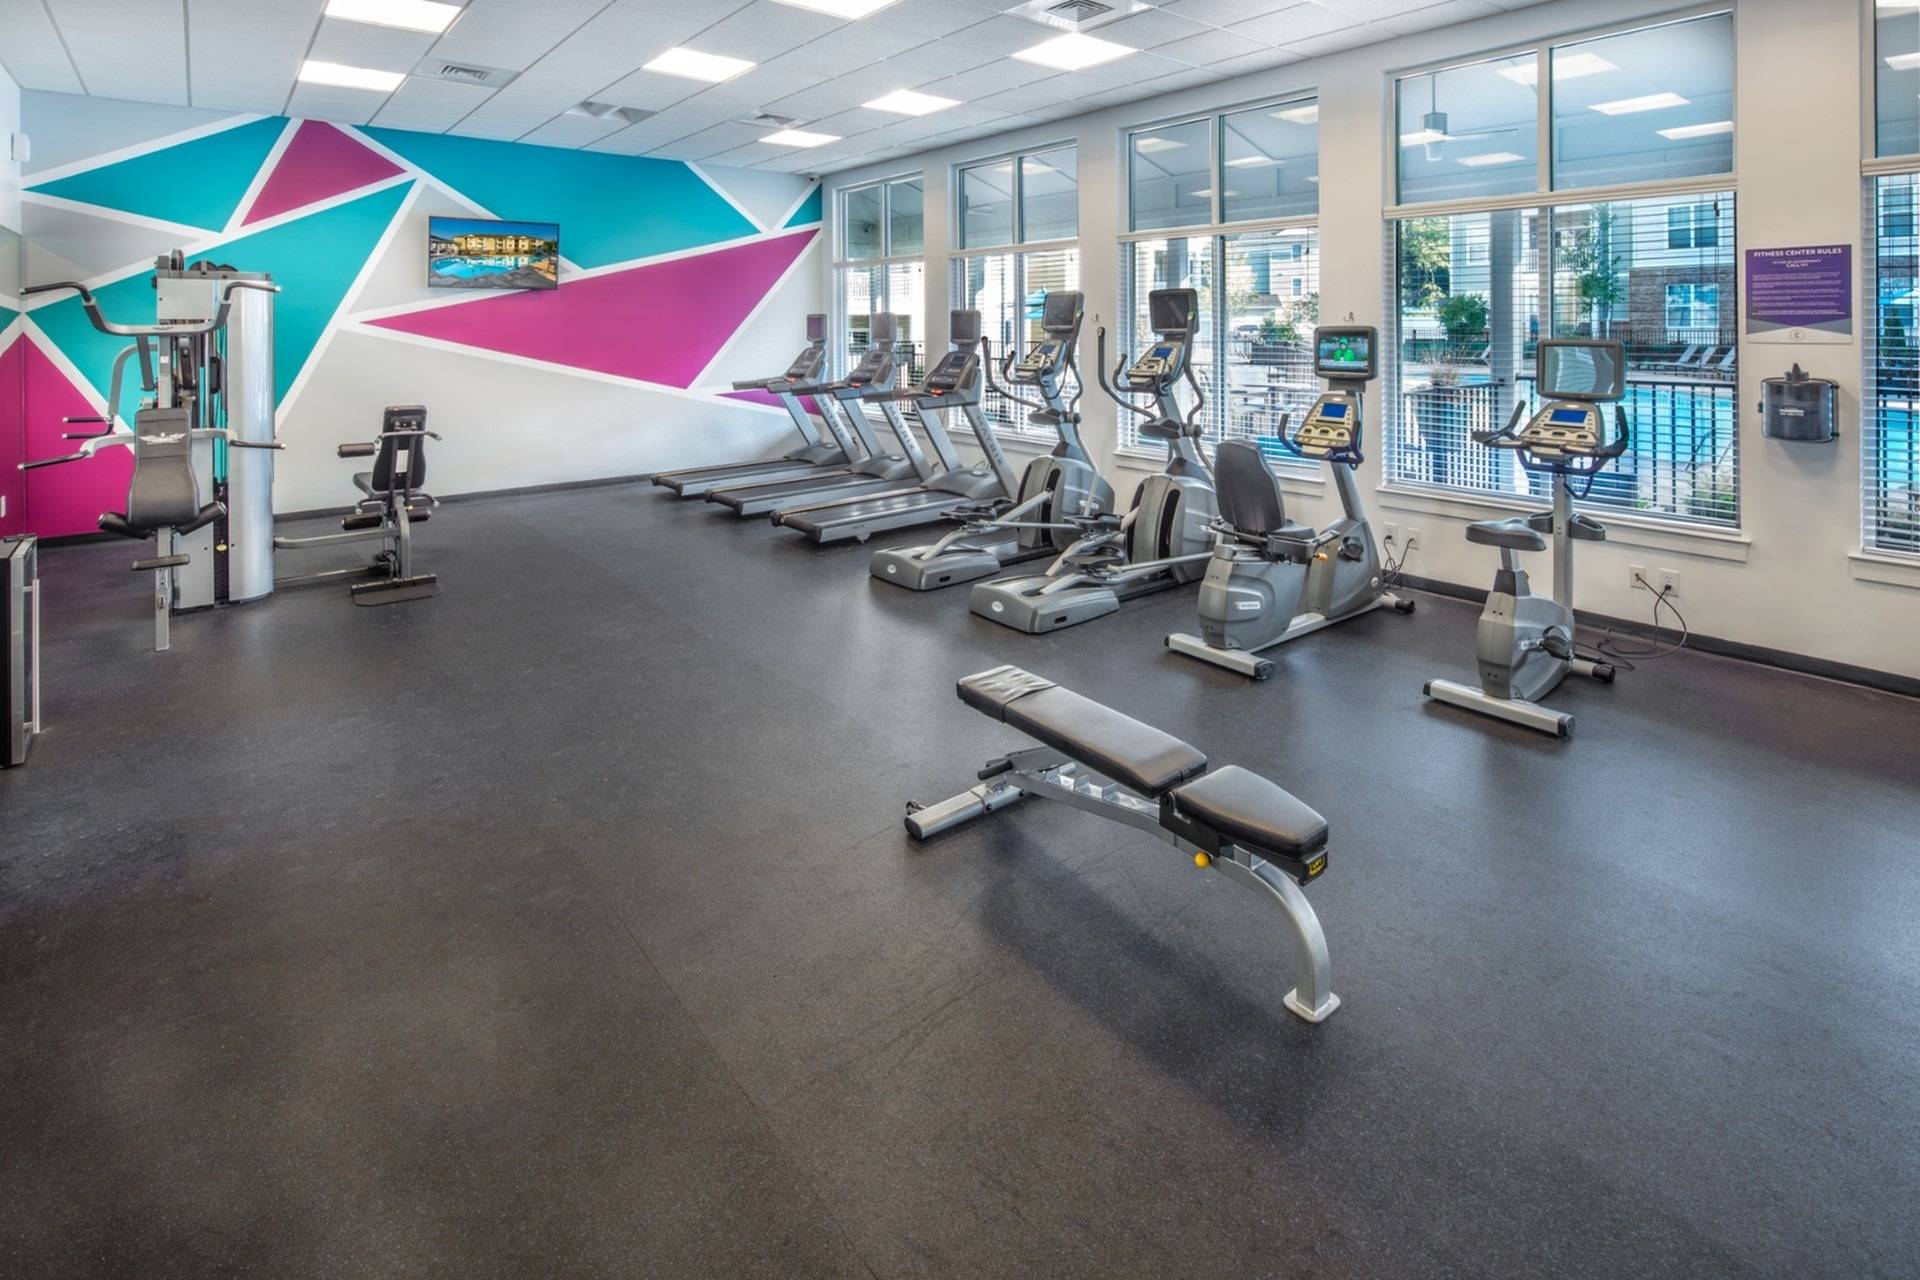 Spacious Fitness Center | Apartments in Midlothian, VA | Colony at Centerpointe